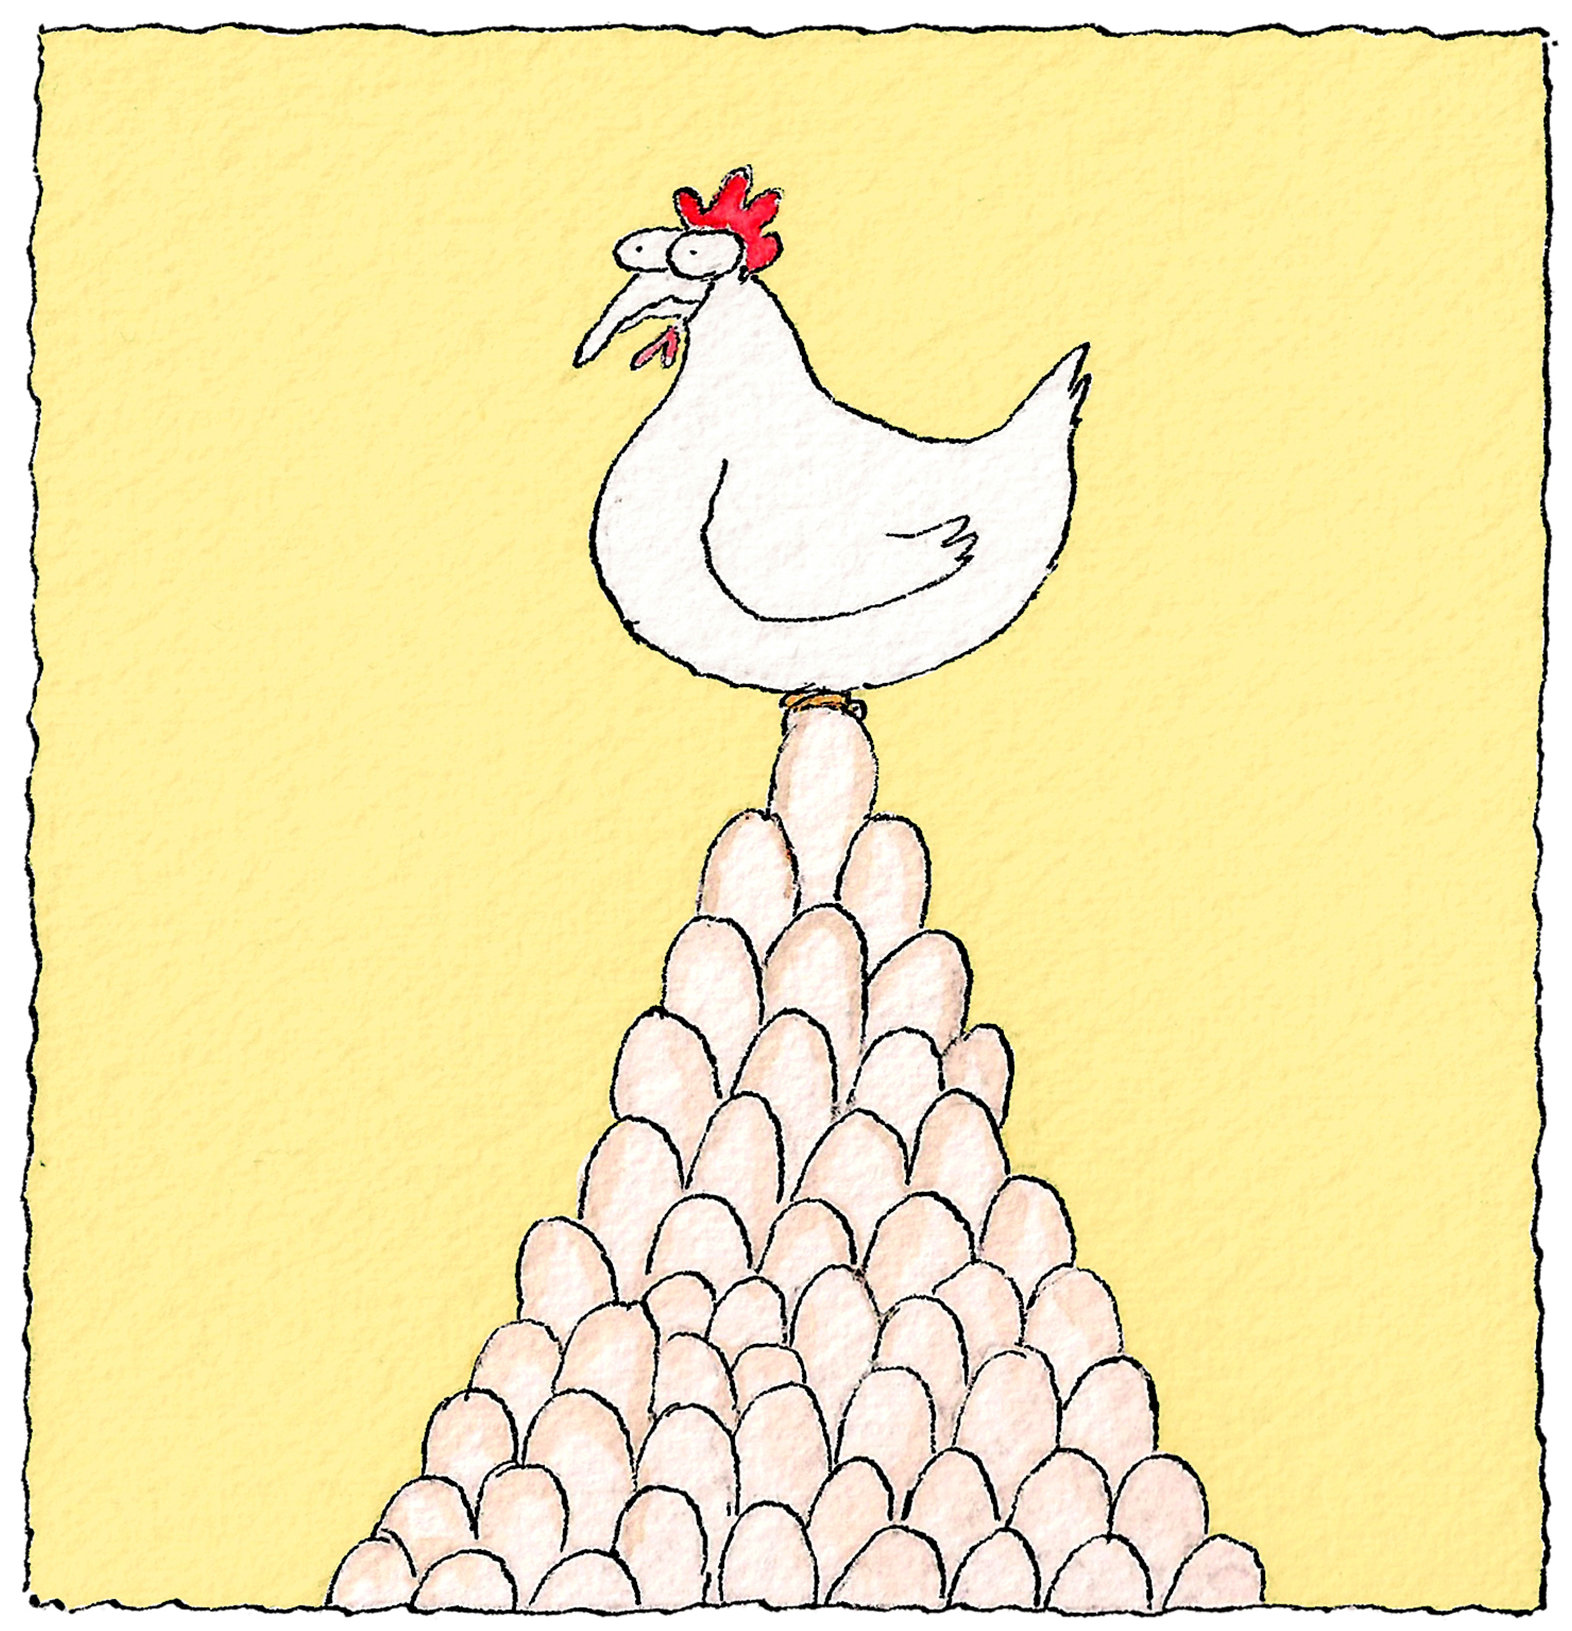 How Many Eggs Does a Chicken Lay in Its Lifetime?